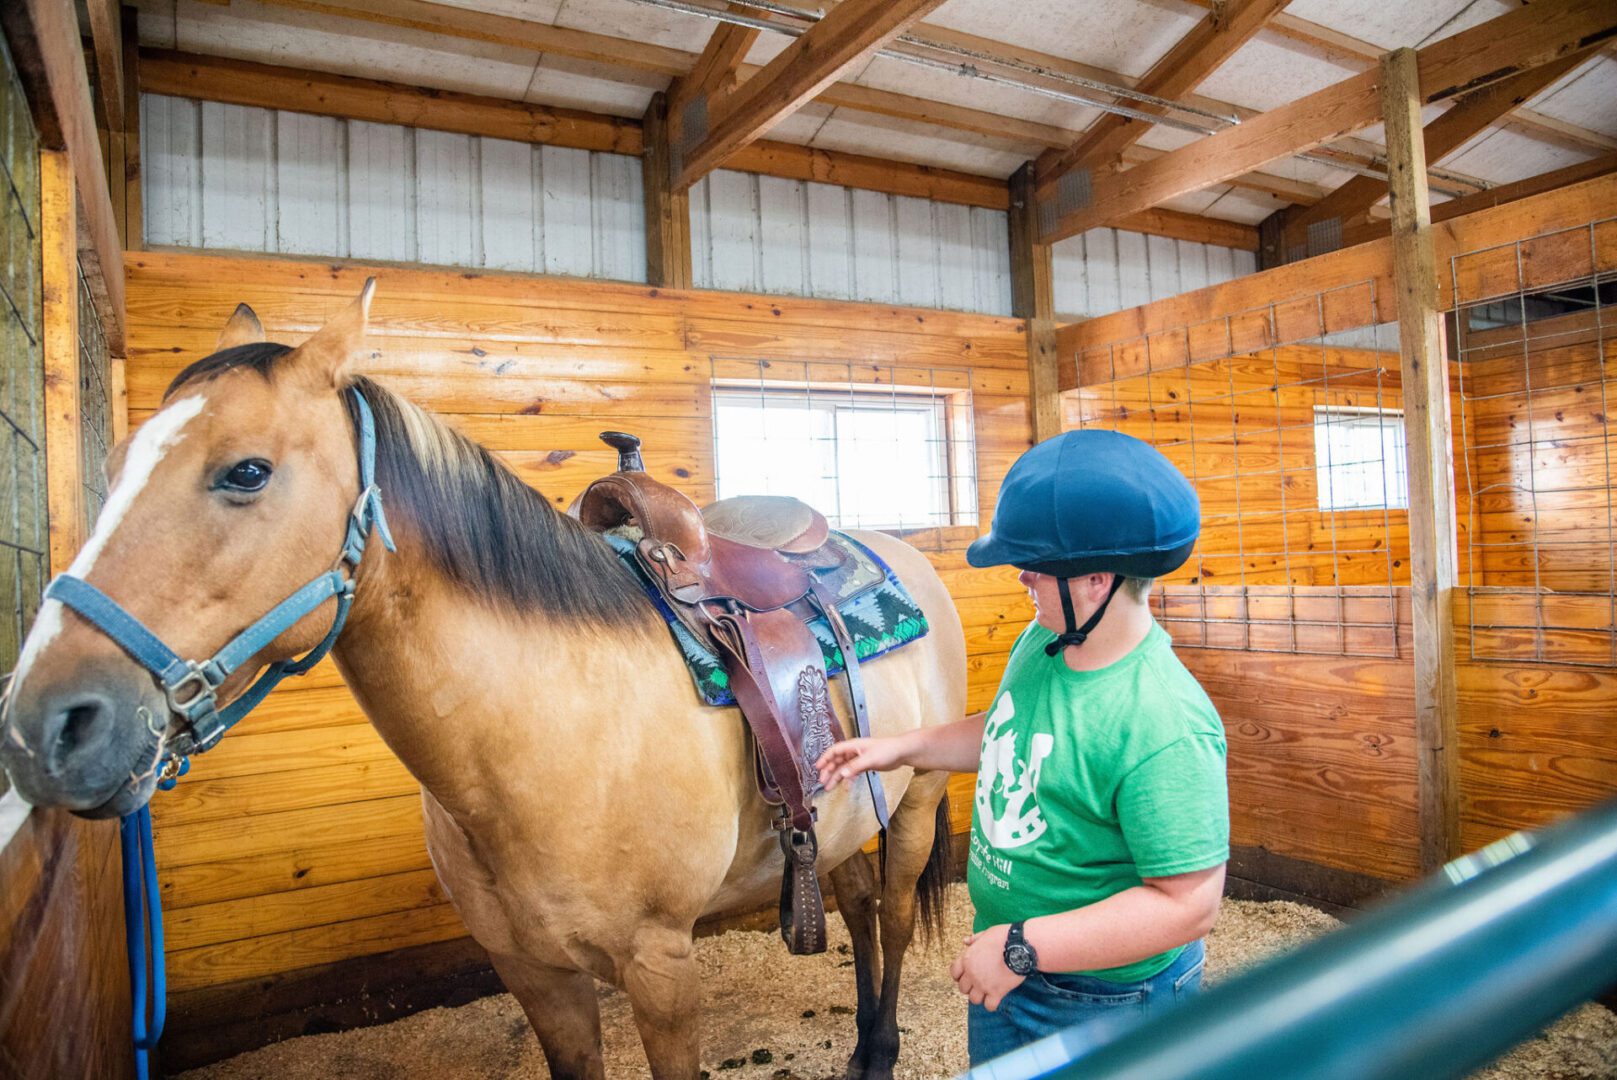 Fall Equine Sessions at Overton Arena